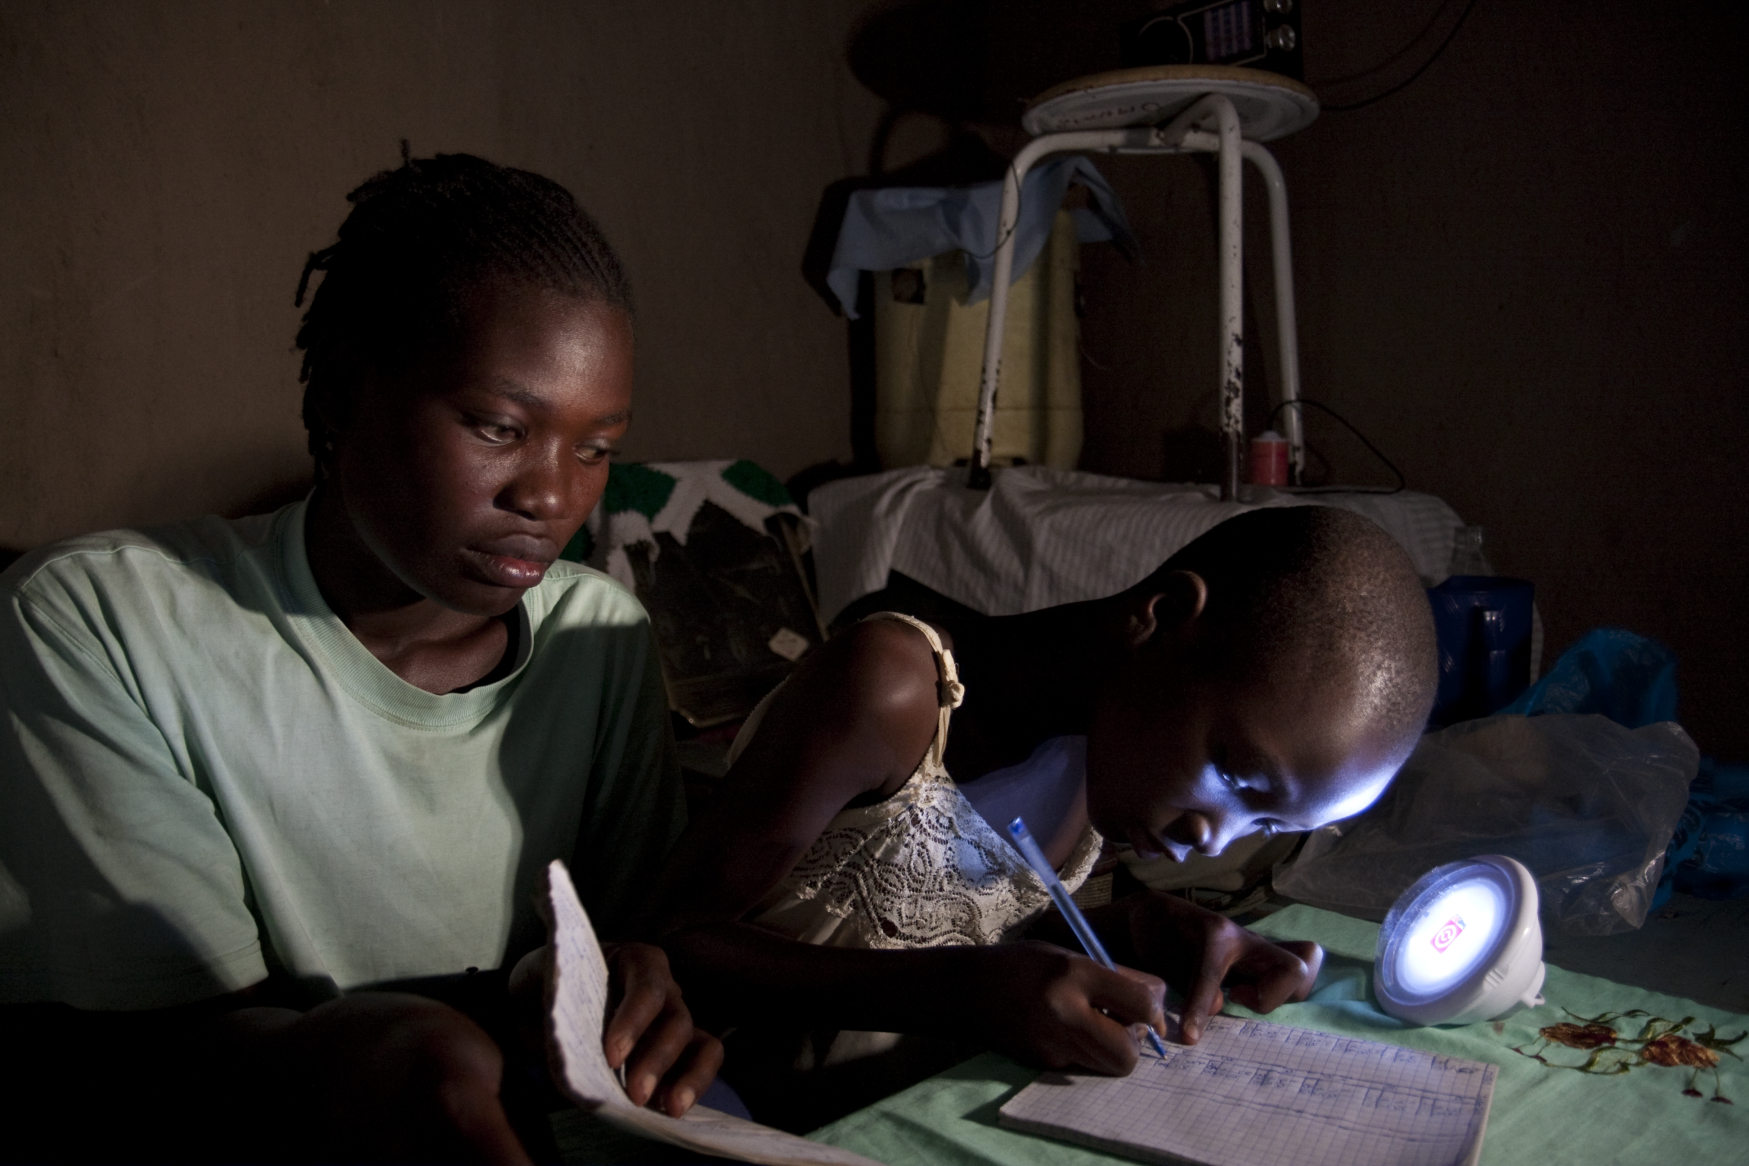 Girl studies at night using solar powered light bought from an entrepreneur trained by Christian Aid partner ADS, Kenya